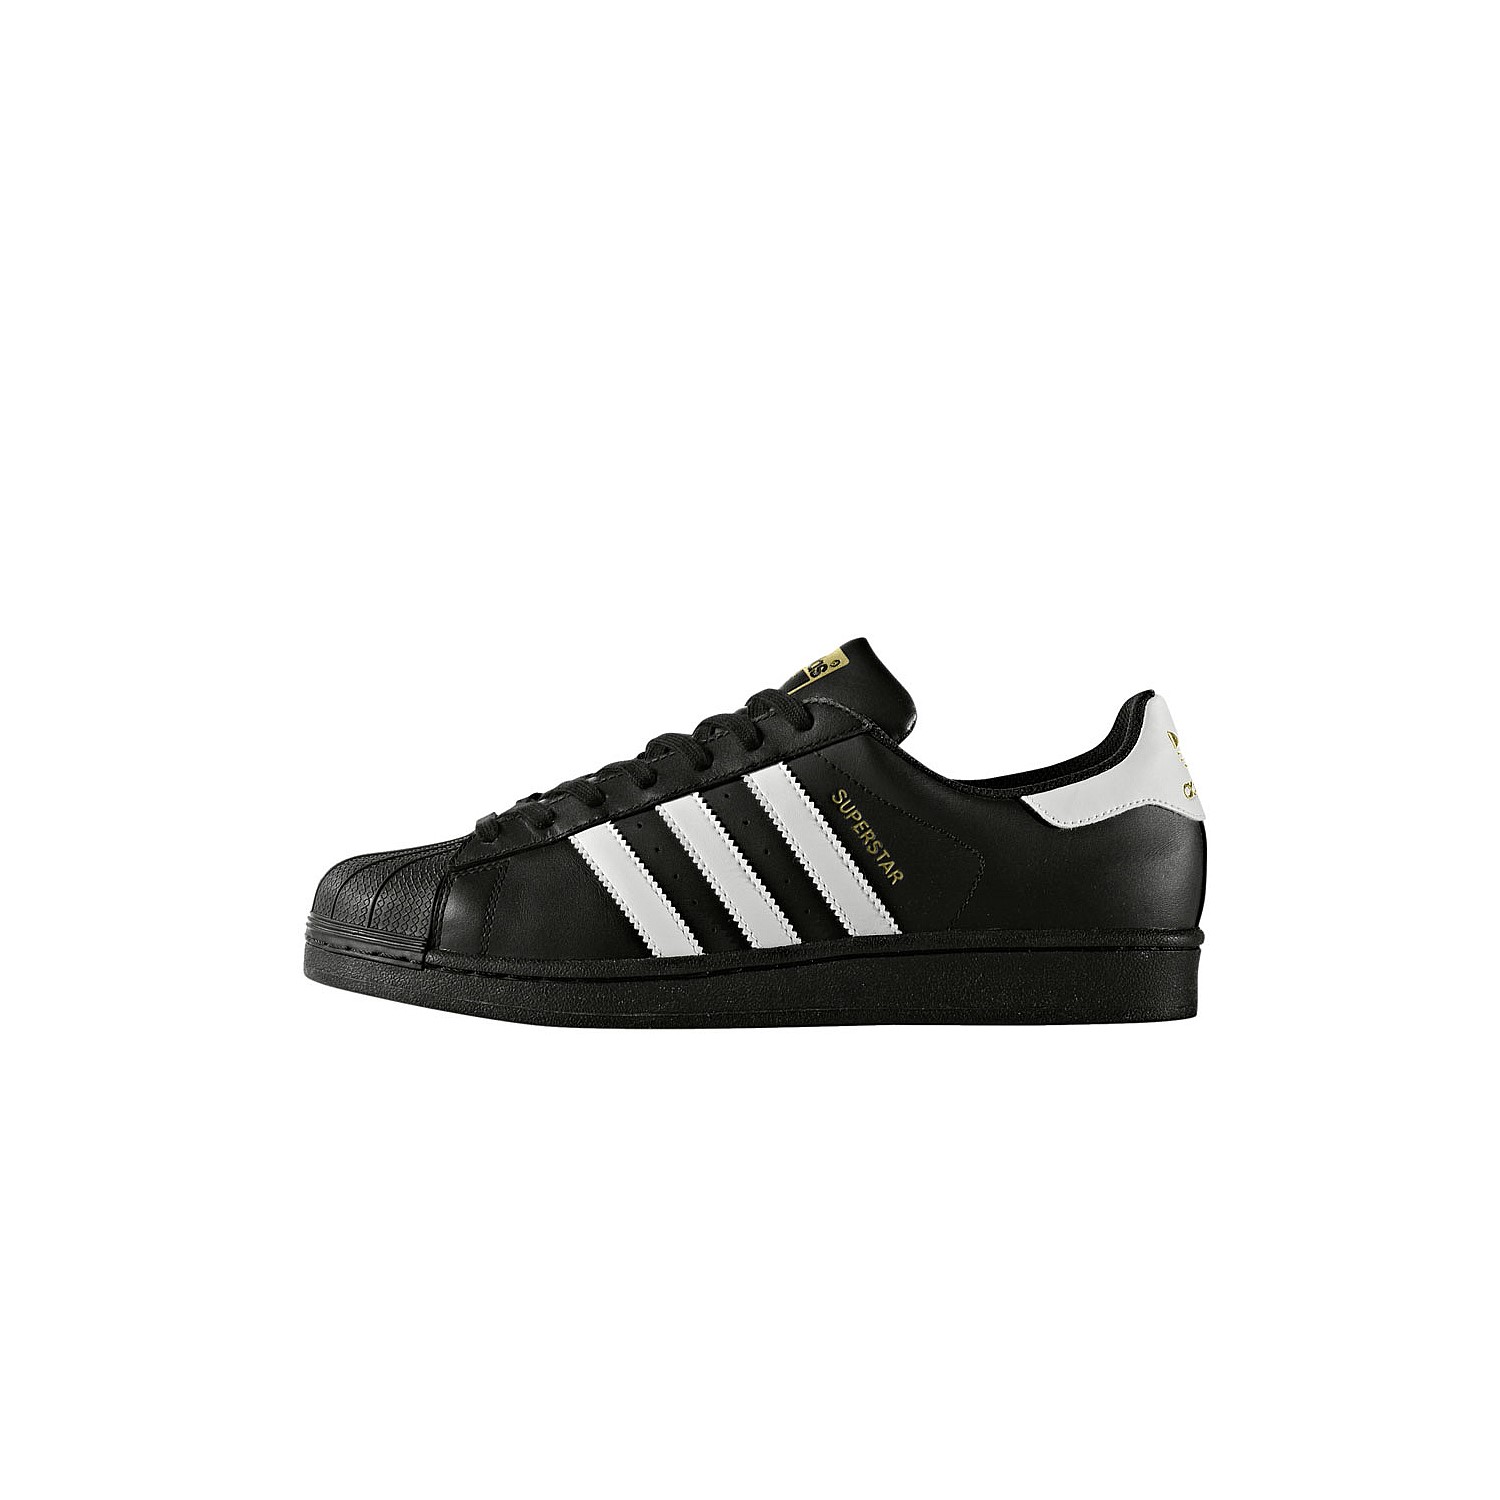 adidas shell toes nz